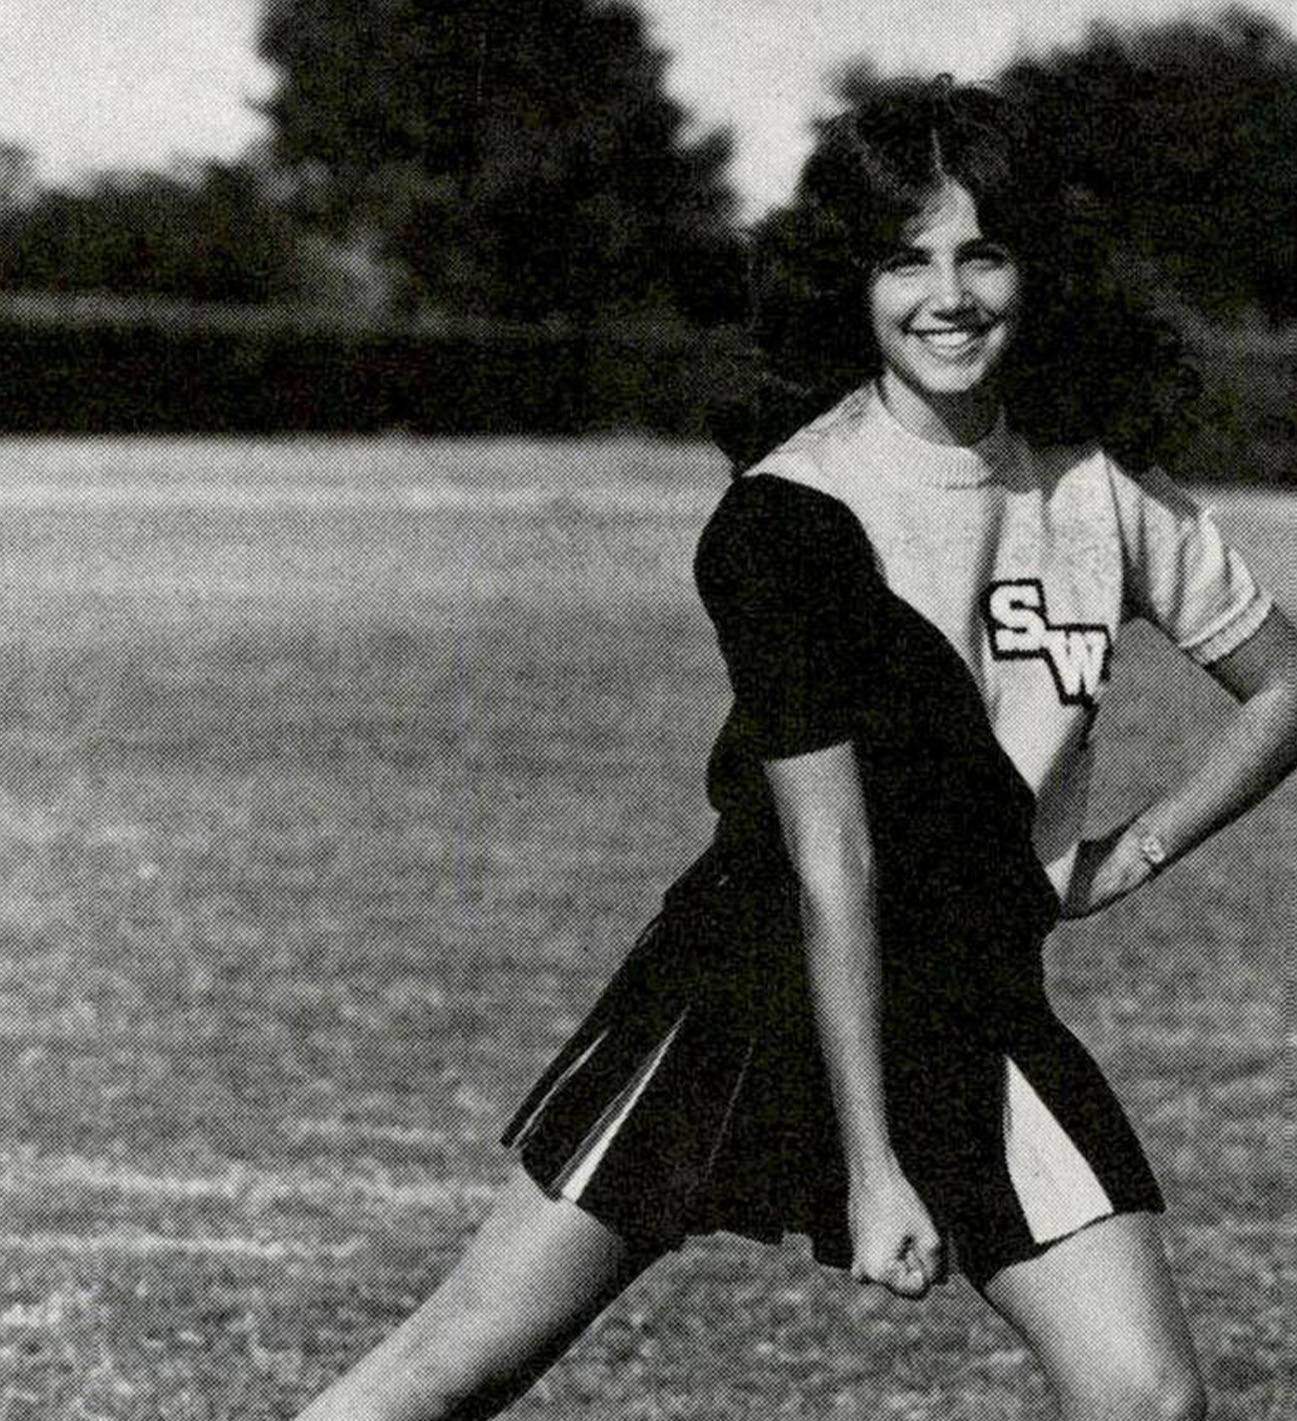 black and white photo of cheerleader on football field